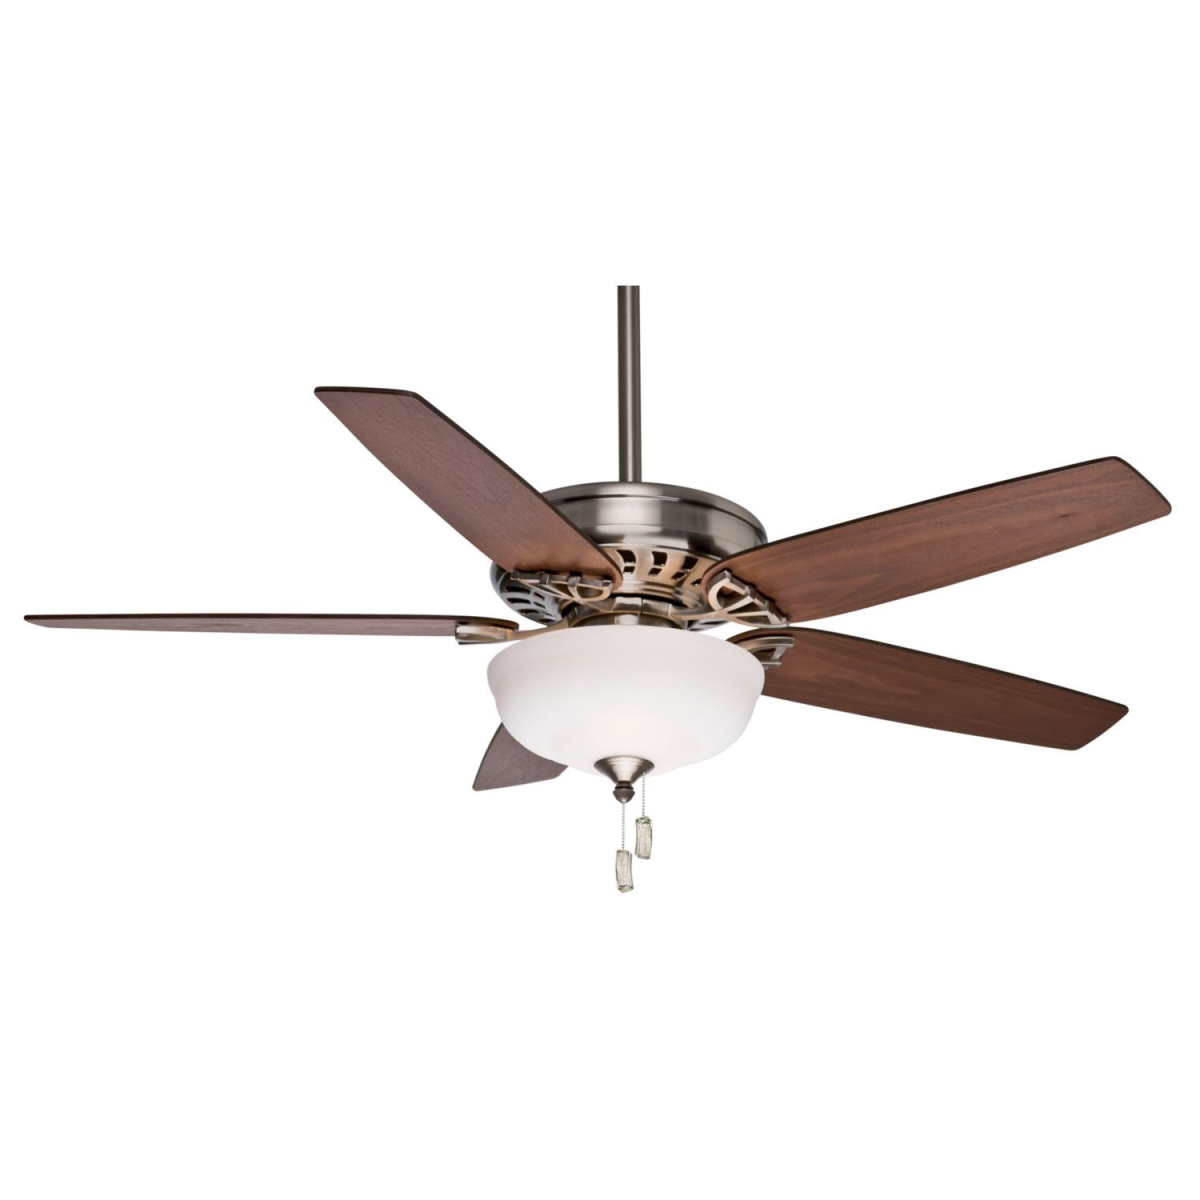 Picture of Casablanca Fan CSB54023 54 in. Concentra Gallery Brushed Nickel Ceiling Fan with Light